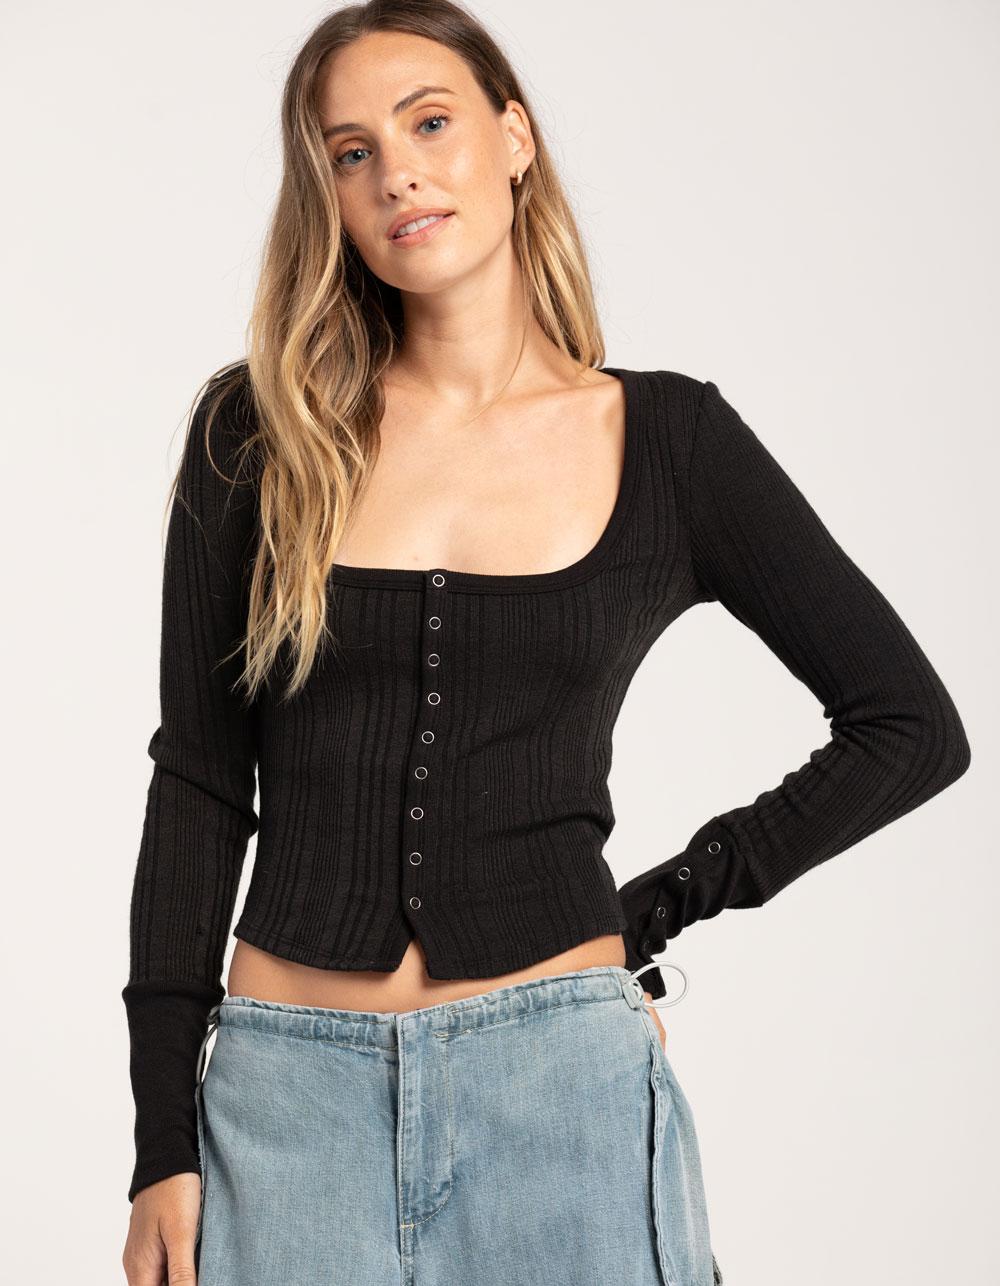 BDG Urban Outfitters Ribbed Knit Womens Top